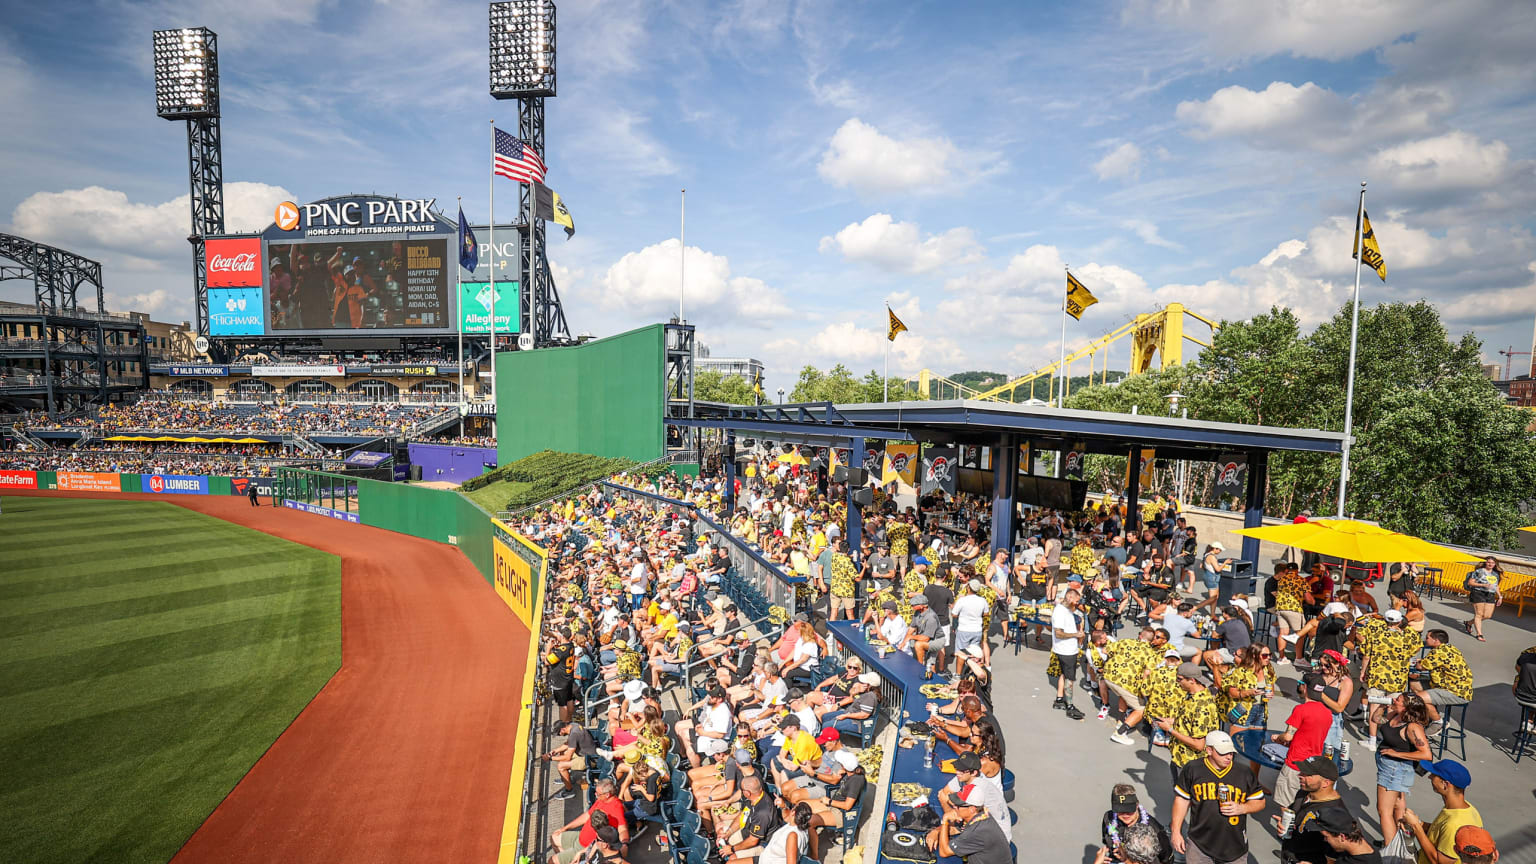 2022 new PNC Park food offerings